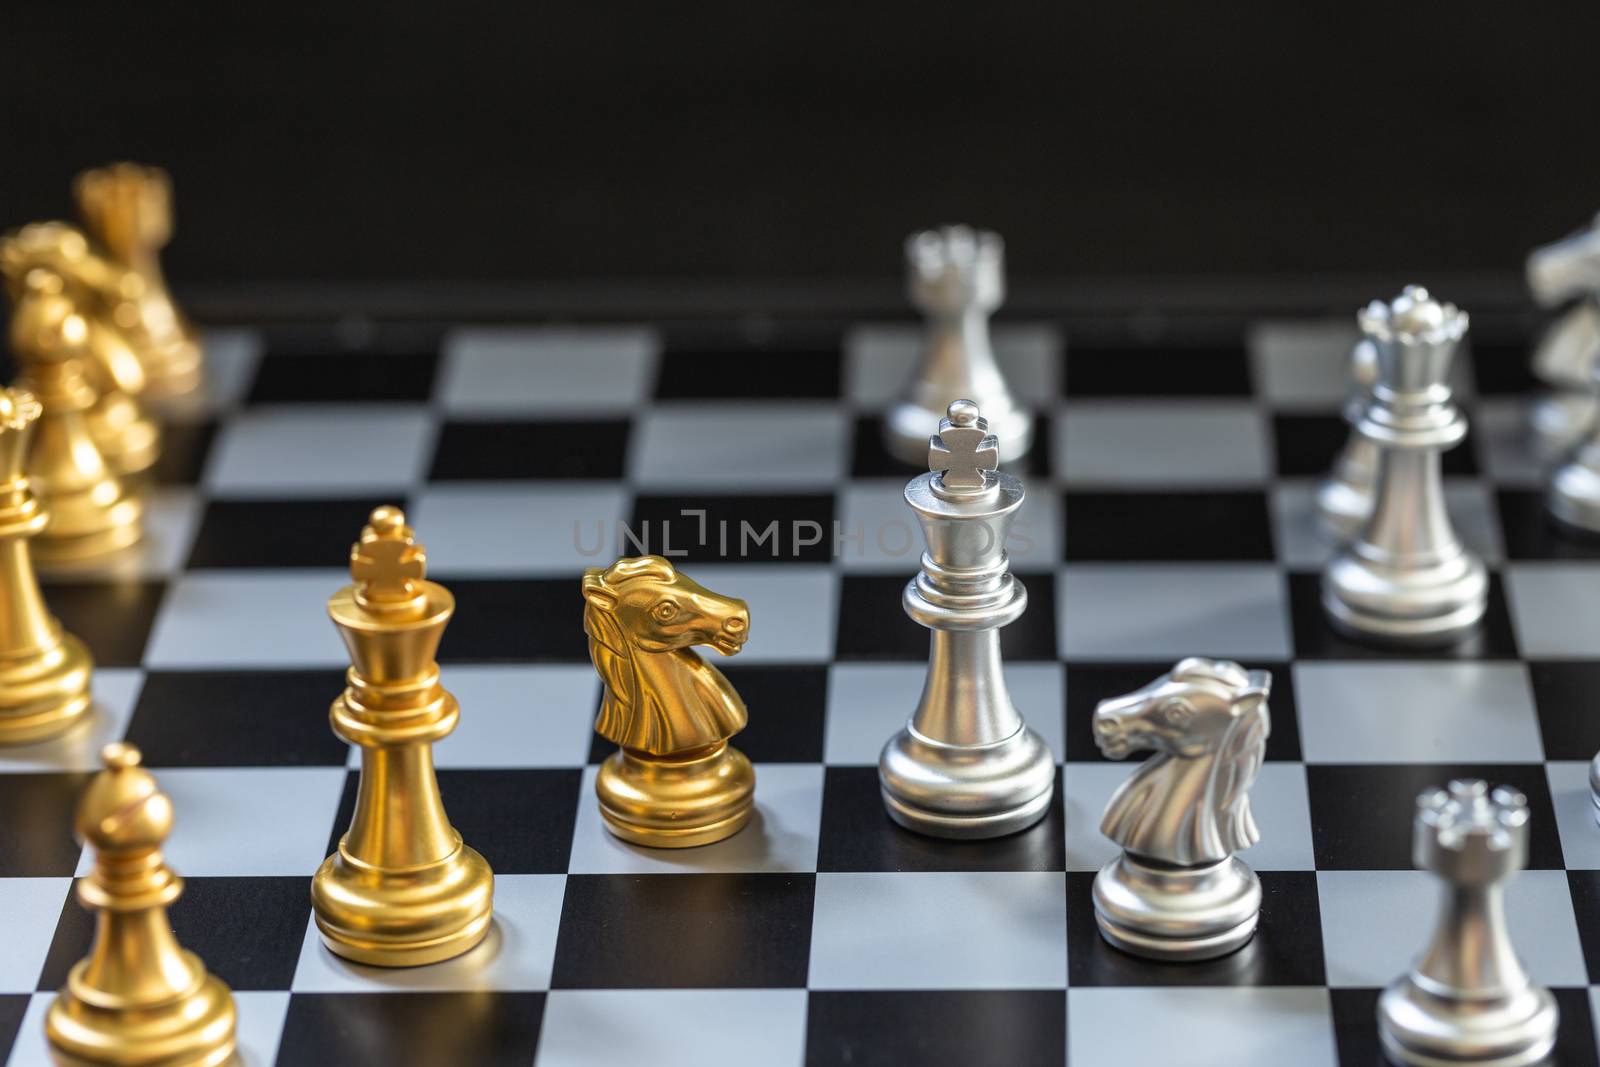 Chess game, set the board waiting to play in both gold and silver pieces detail blur